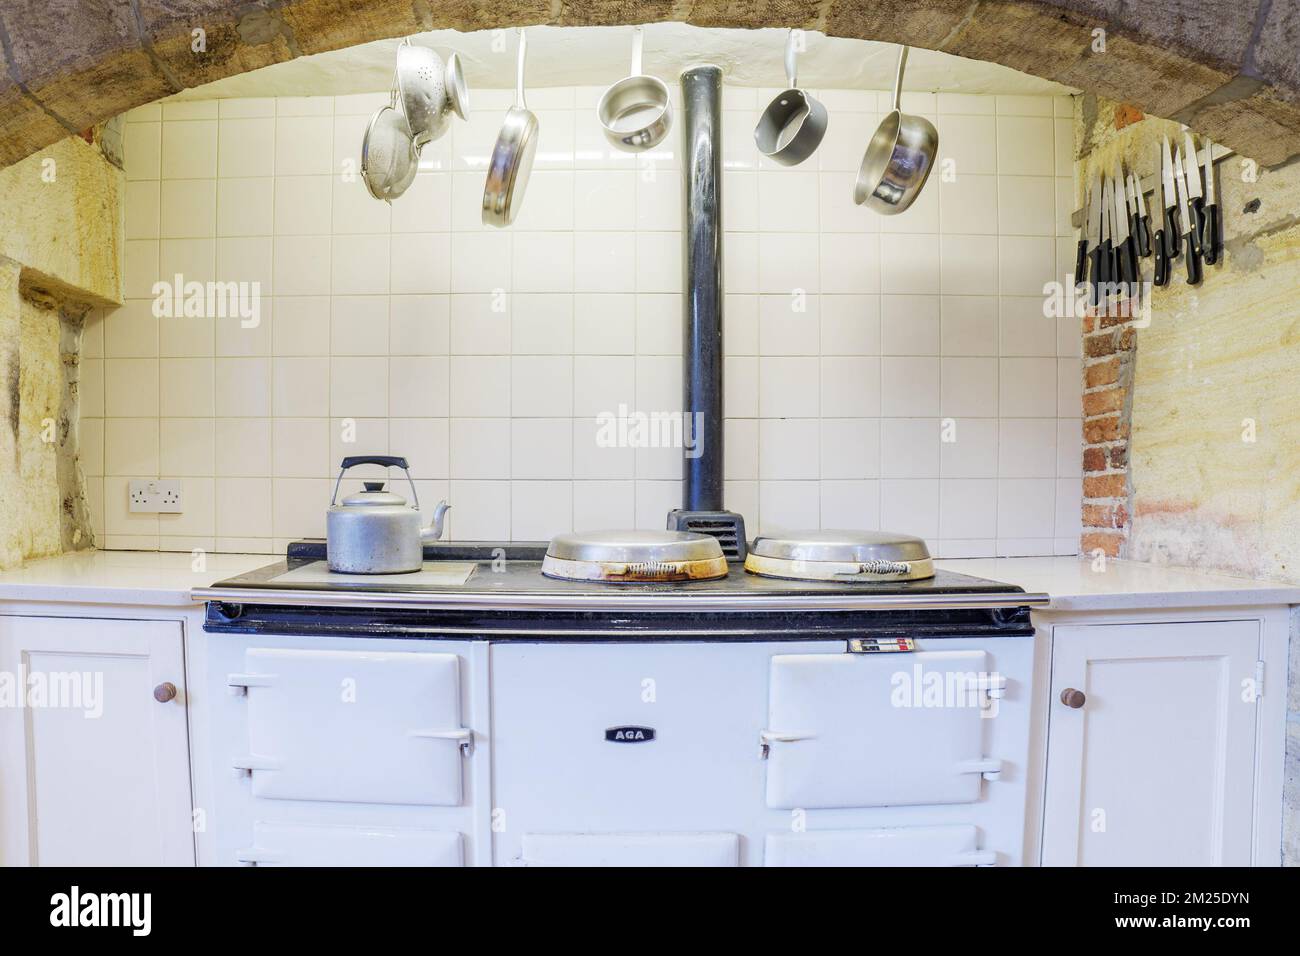 Country farmhouse kitchen withAga oven and hanging pans. Stock Photo